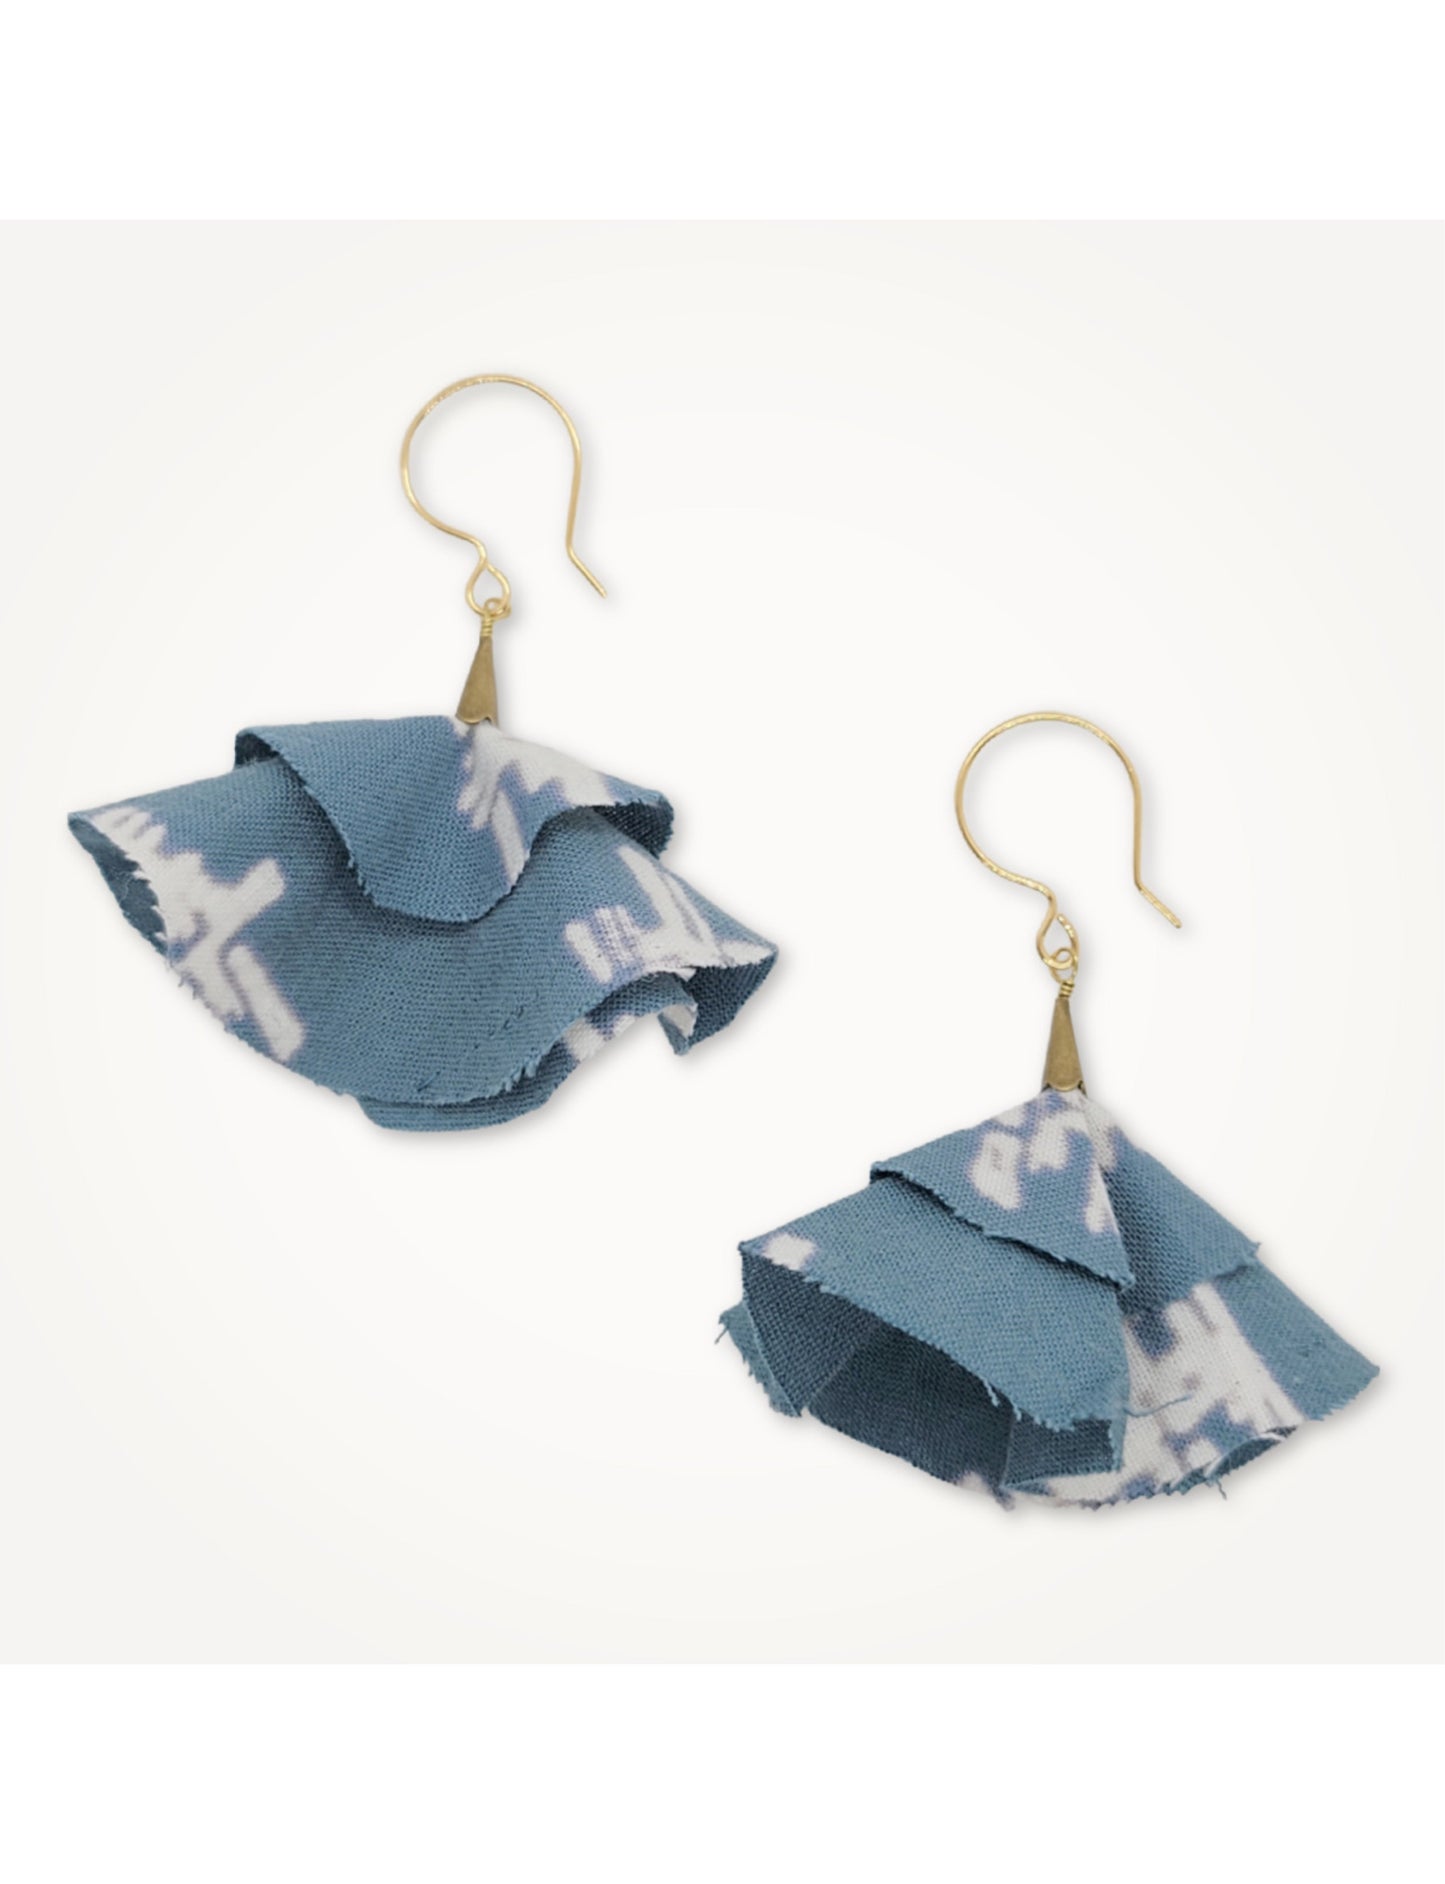 Flower Earrings- 3 Color Options by Passion Lilie